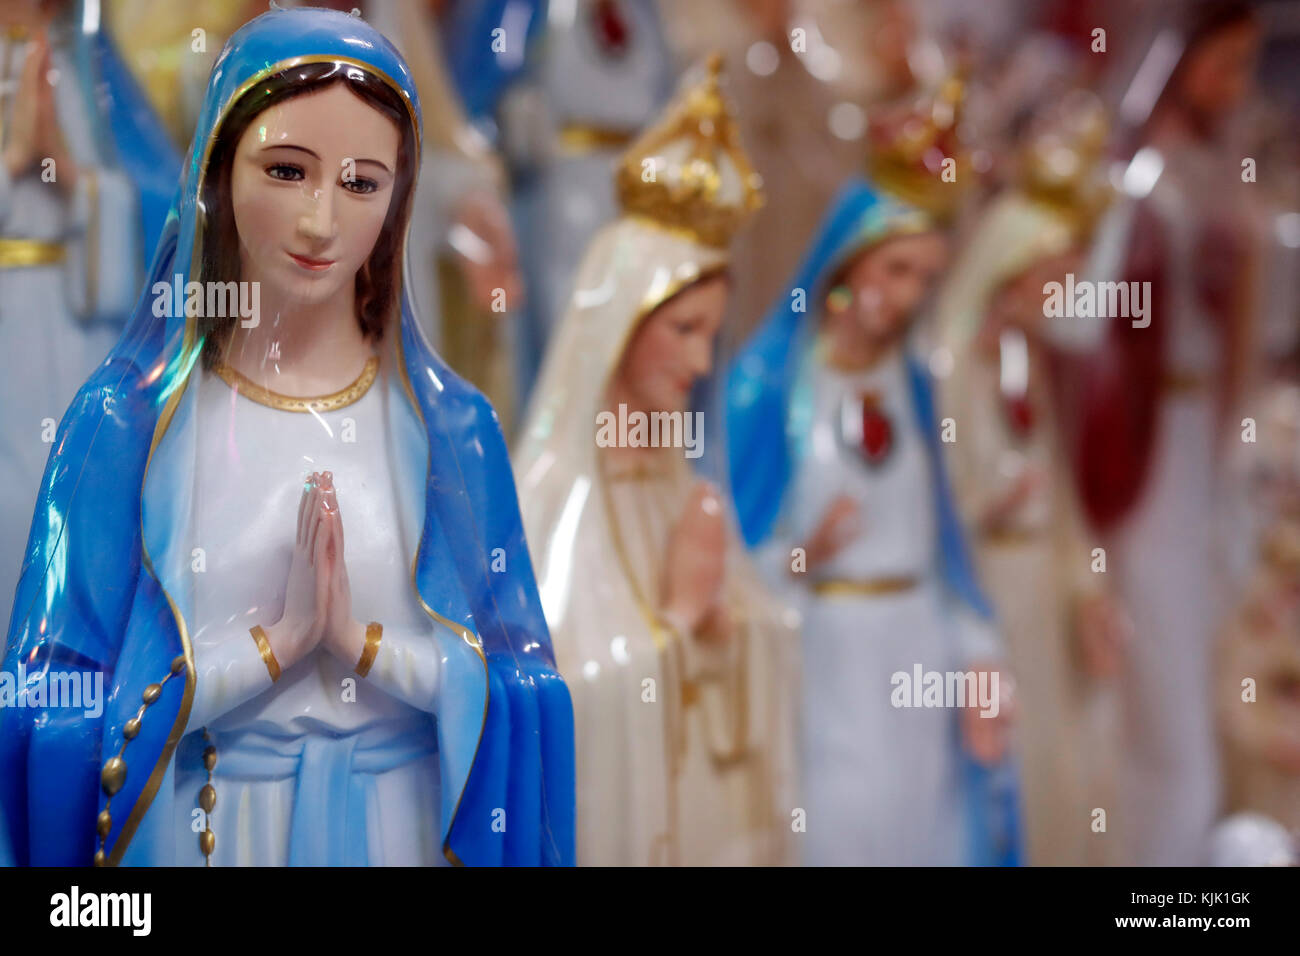 Shop selling religious christian items.  Holy Virgin statues.  Ho Chi Minh City.  Vietnam. Stock Photo